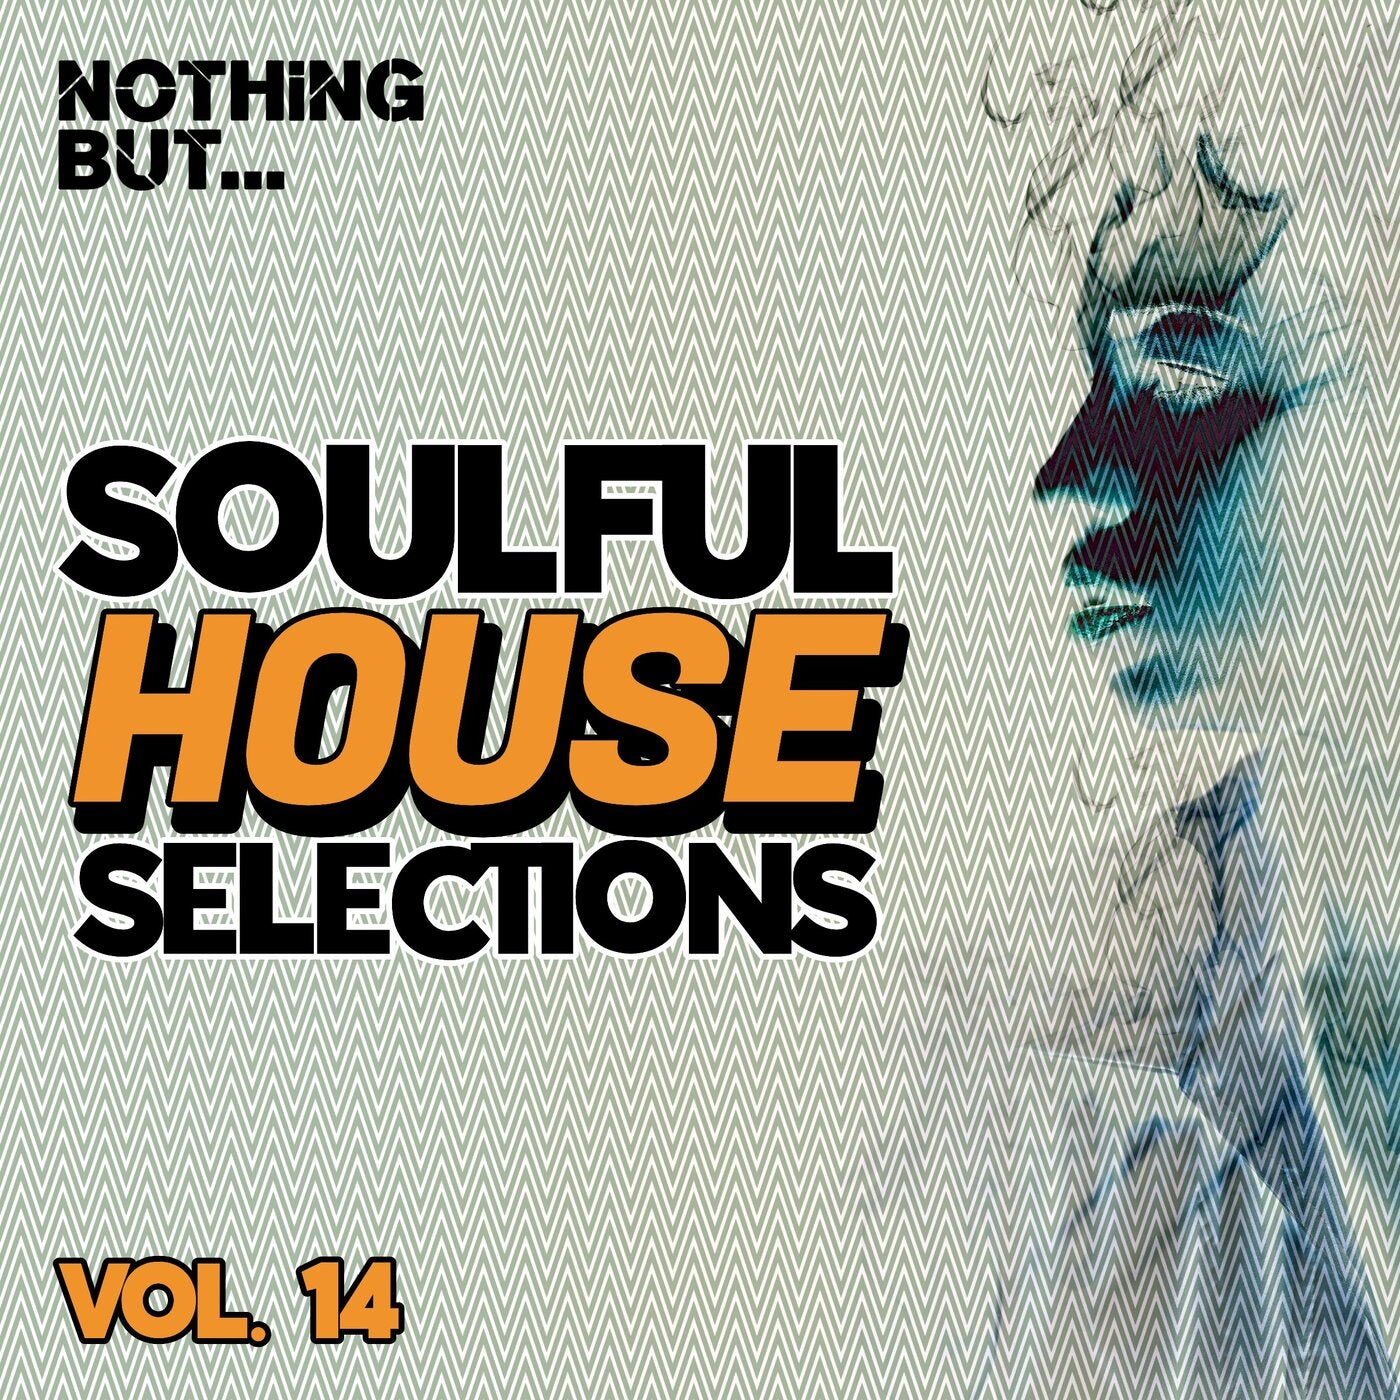 Nothing But... Soulful House Selections, Vol. 14